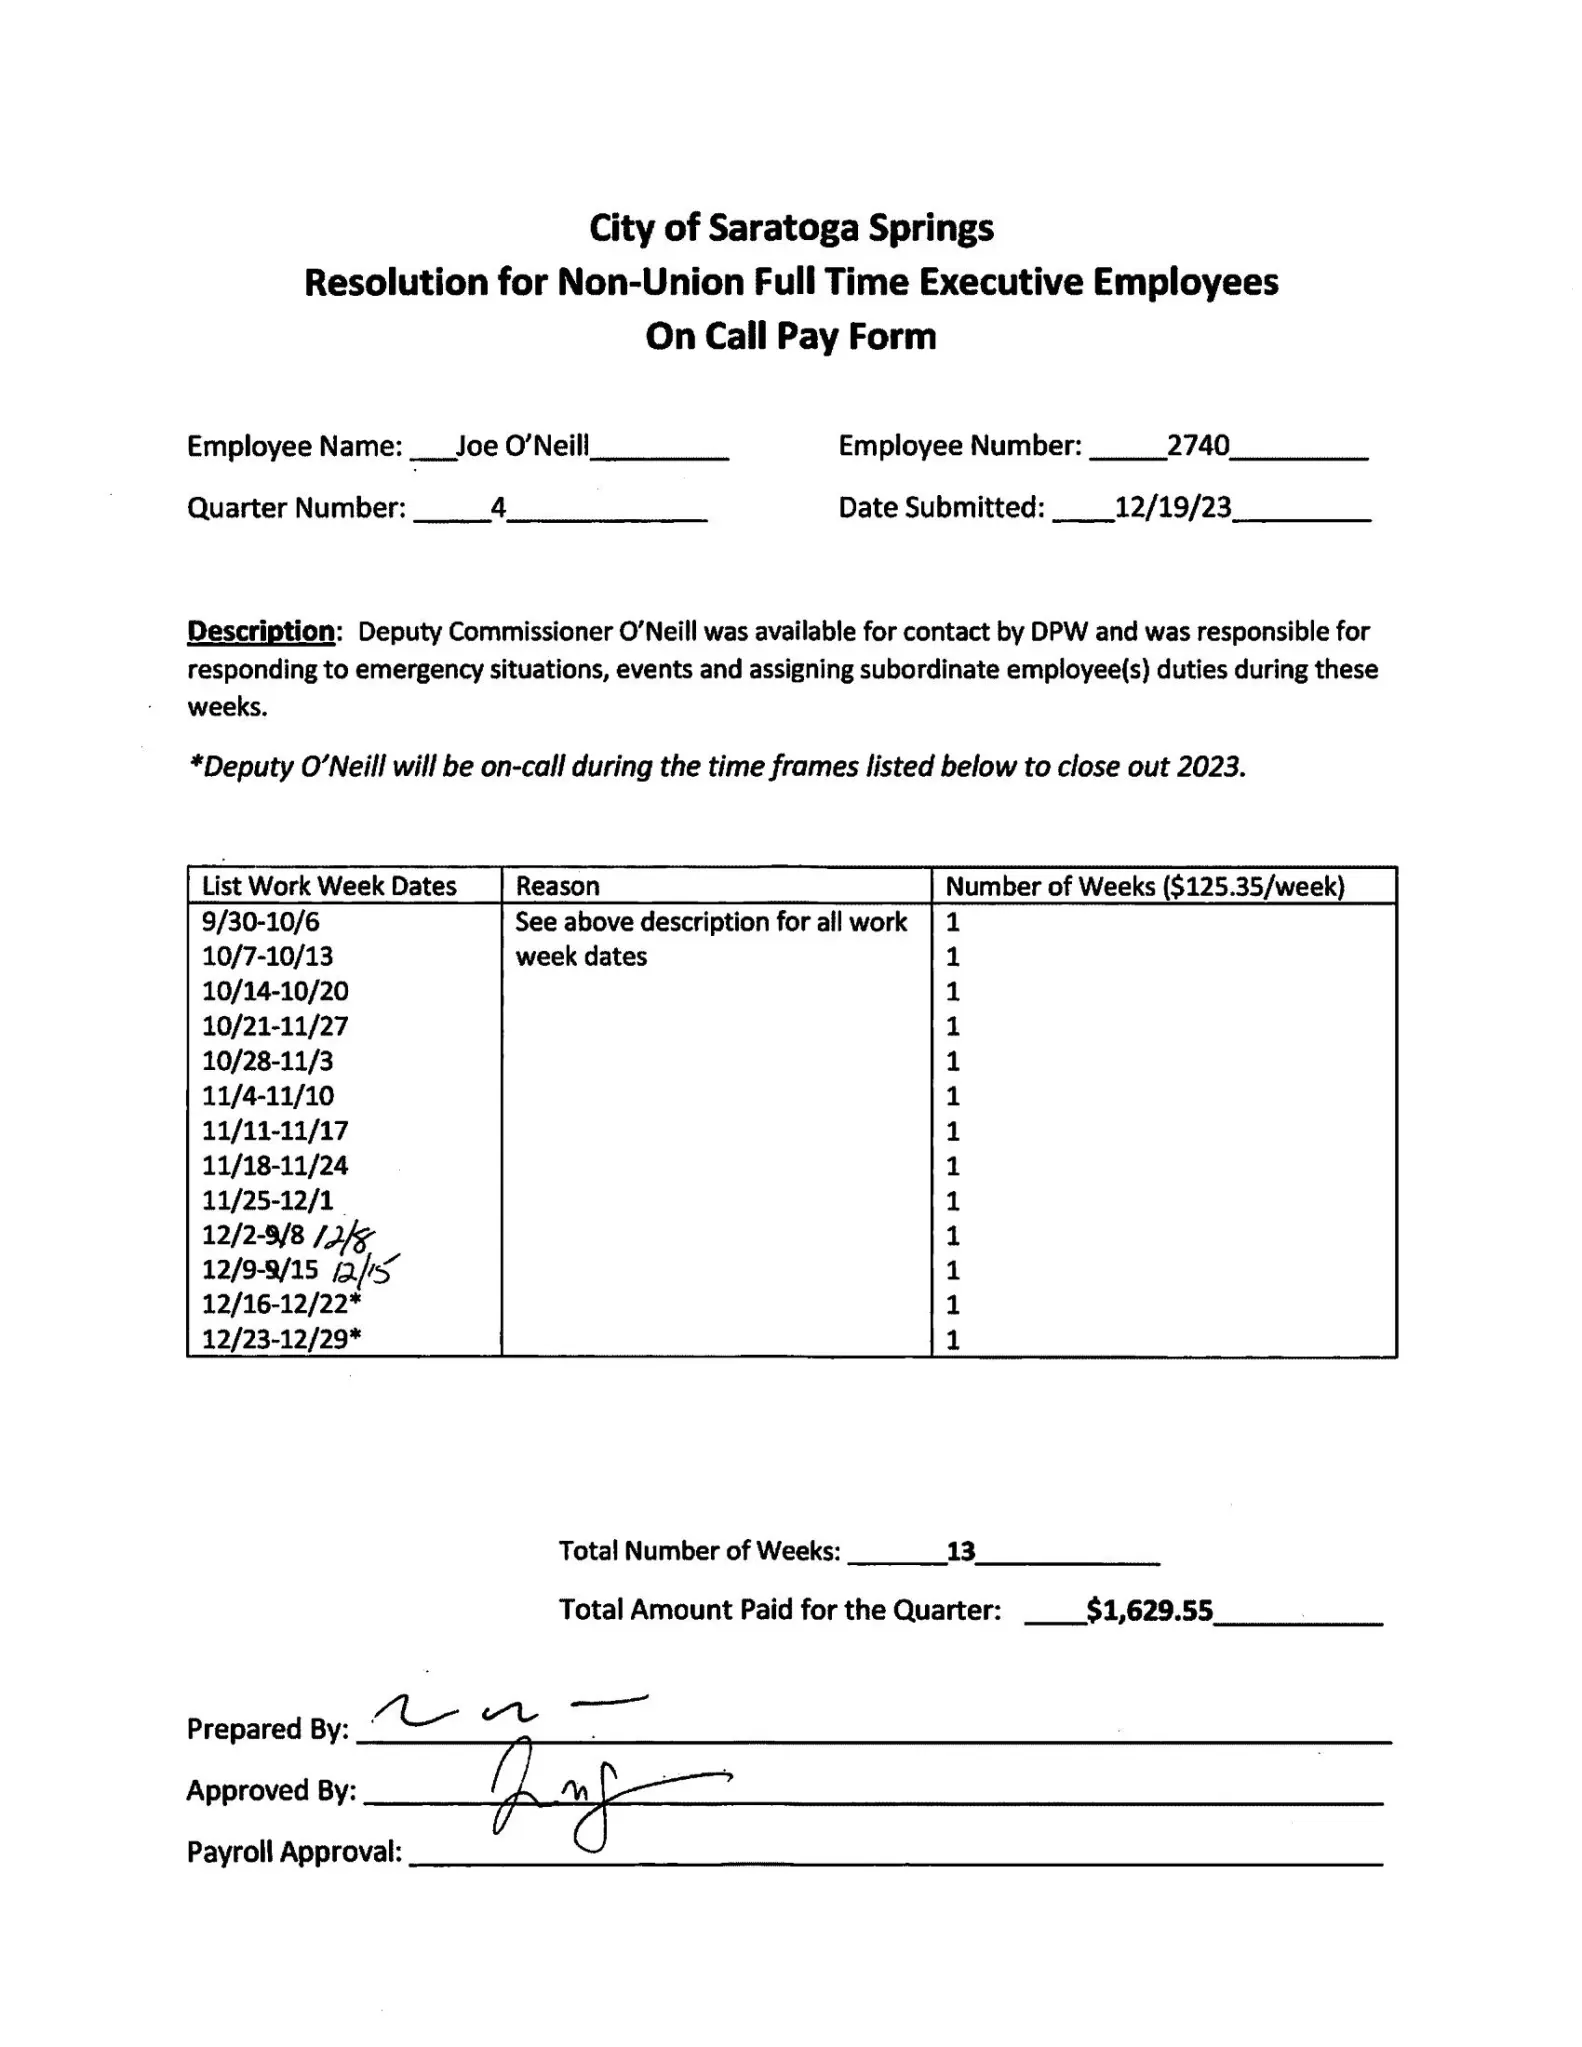 kaufmann-supplemental-foil-reply-on-call-pay_page_5.webp